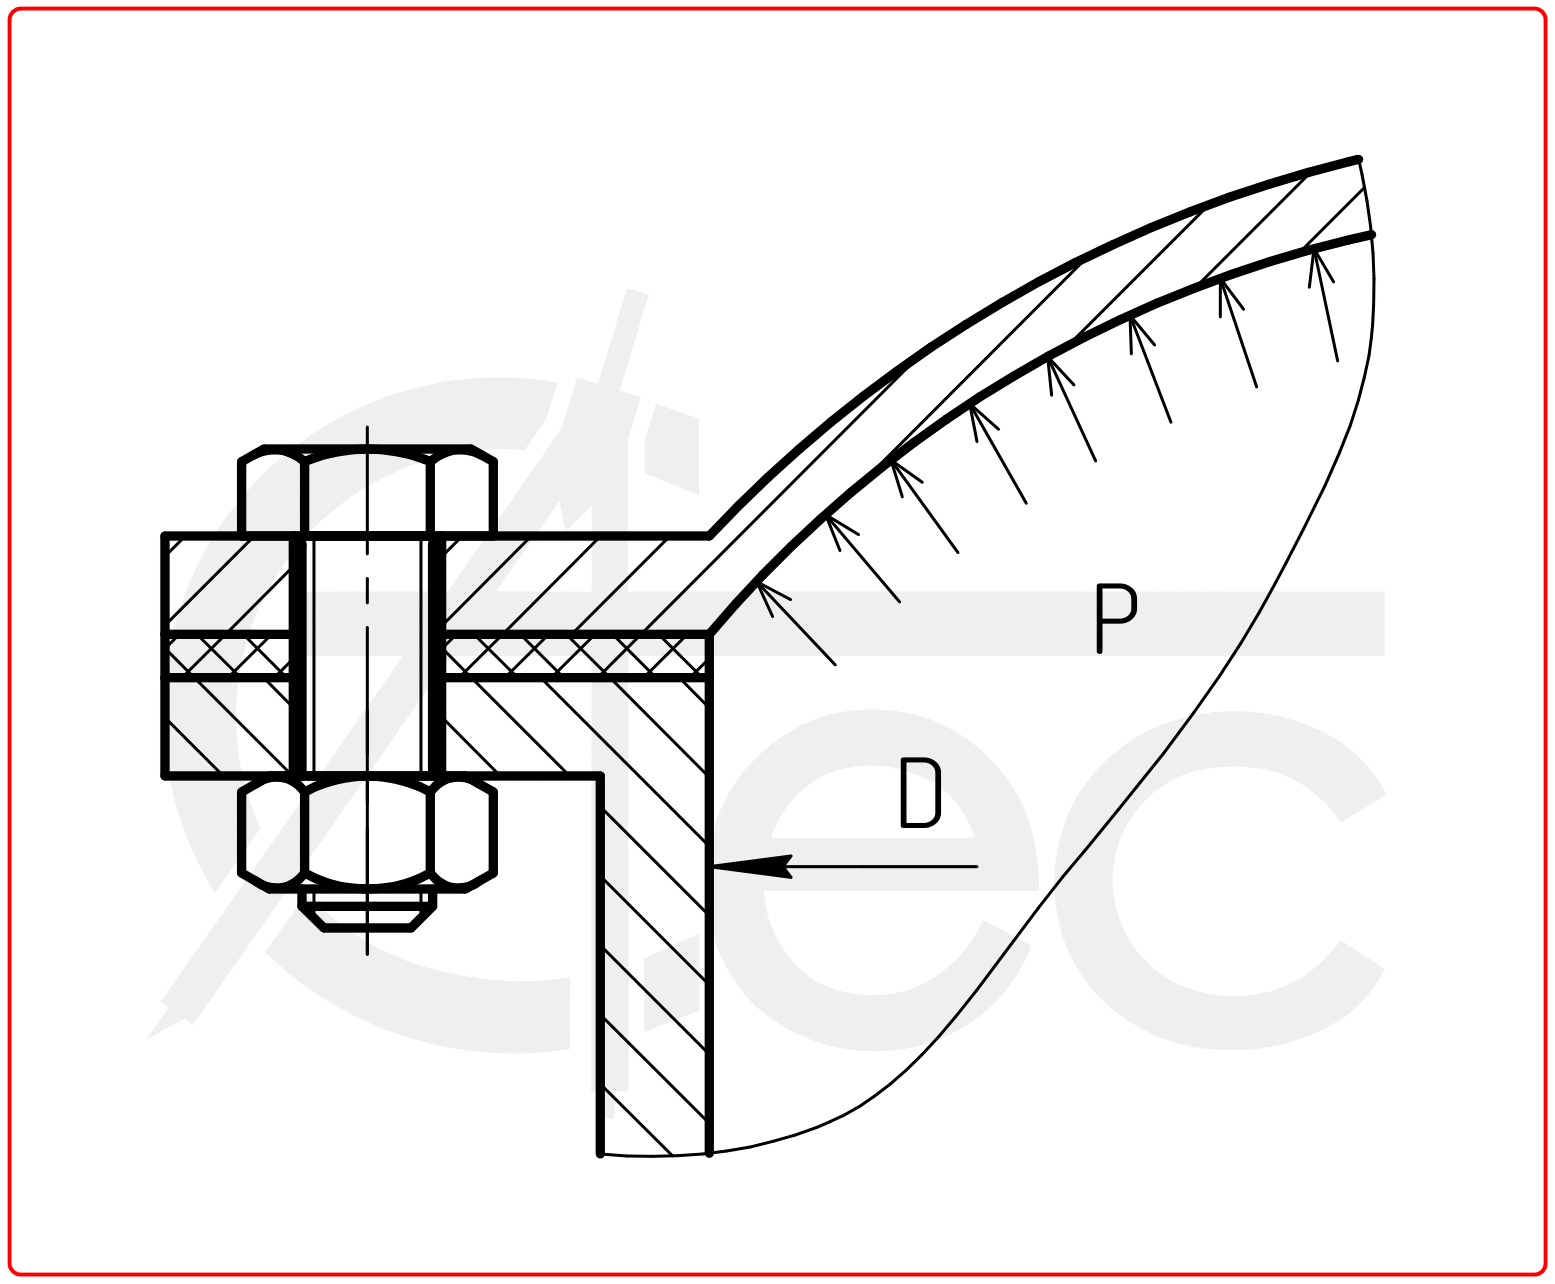 Calculation of Flange Connection